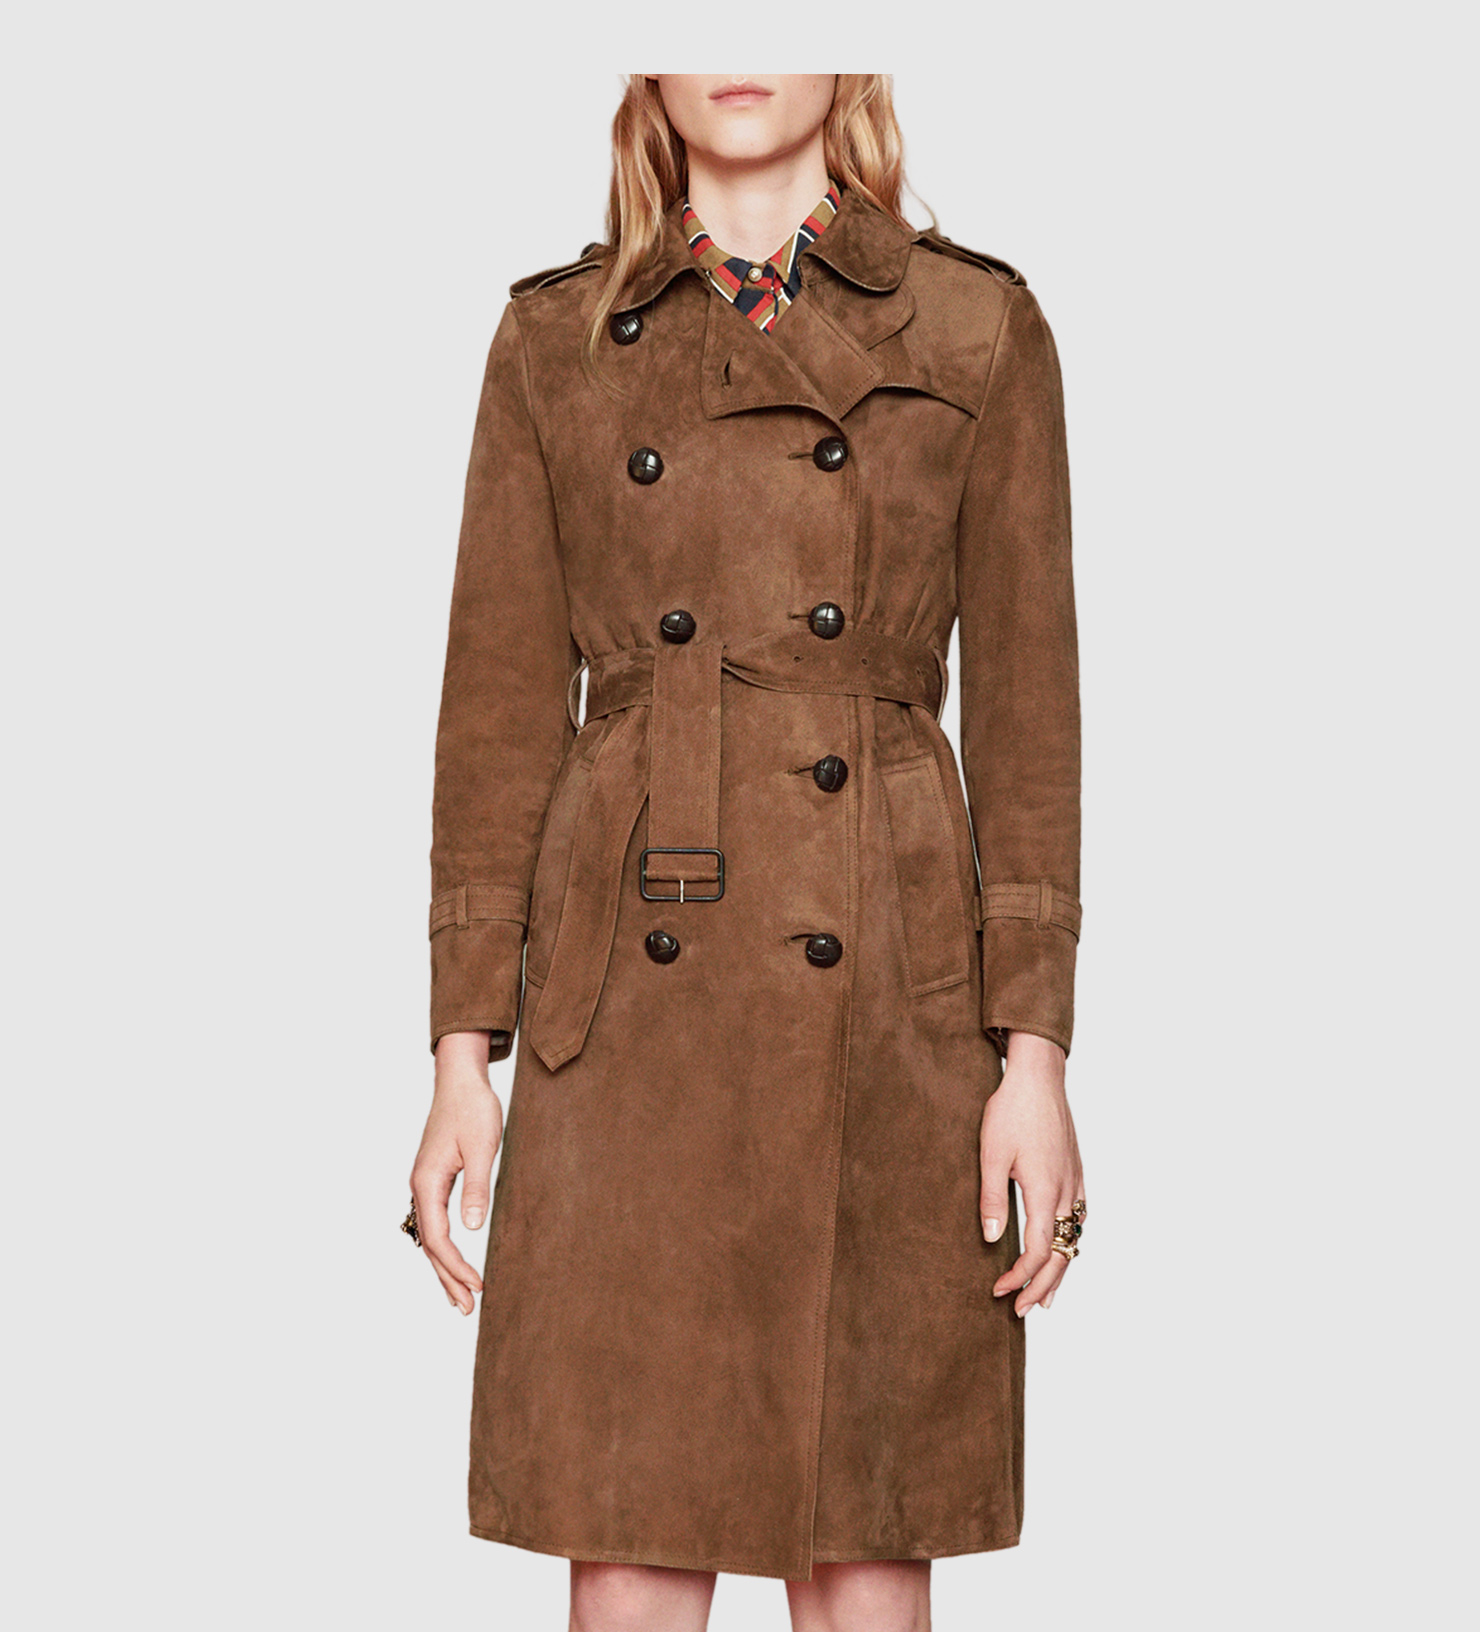 Gucci Suede Belted Trench Coat in Brown | Lyst